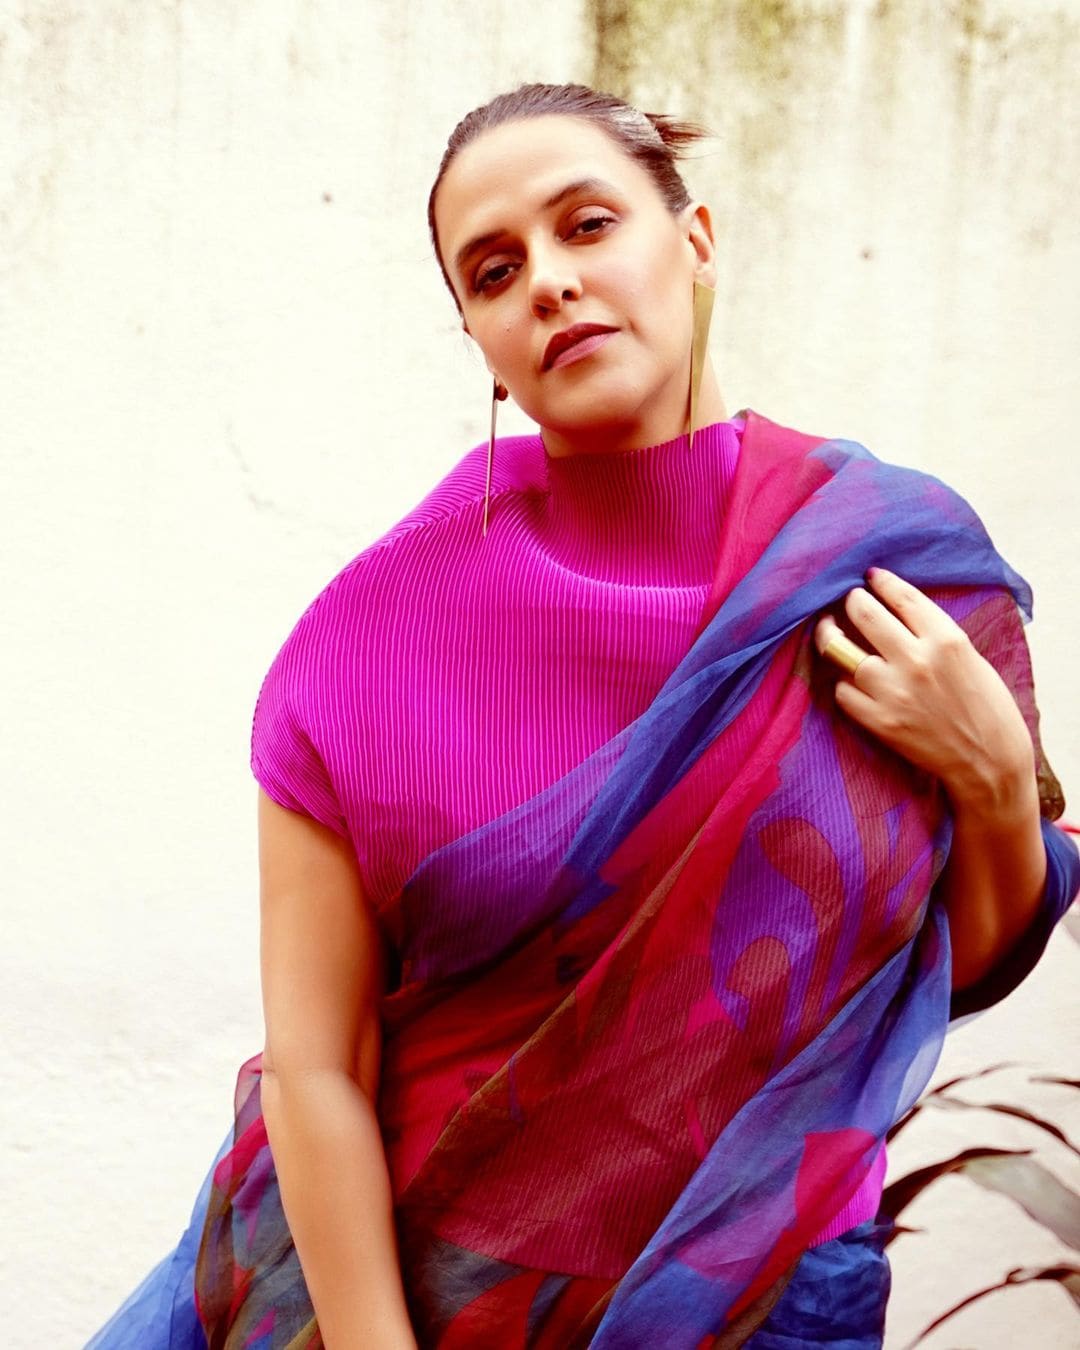 Neha Dhupia recently dazzled in an organza saree that had quirky prints in shades of fuchsia pink, blue, and pickle green.